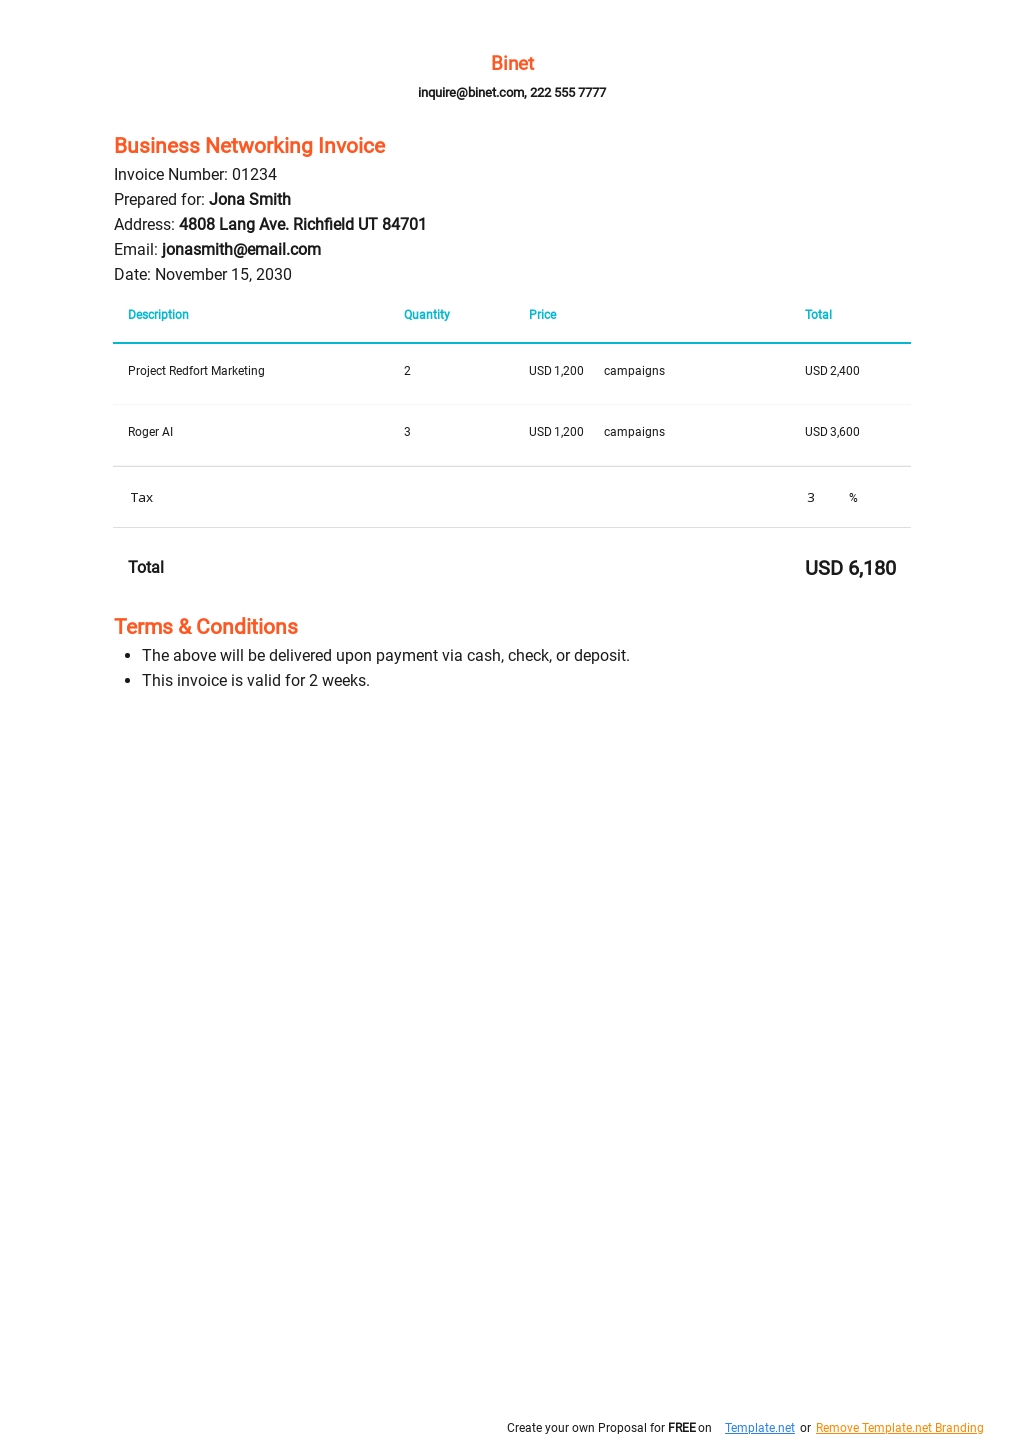 Business Networking Invoice Template.jpe